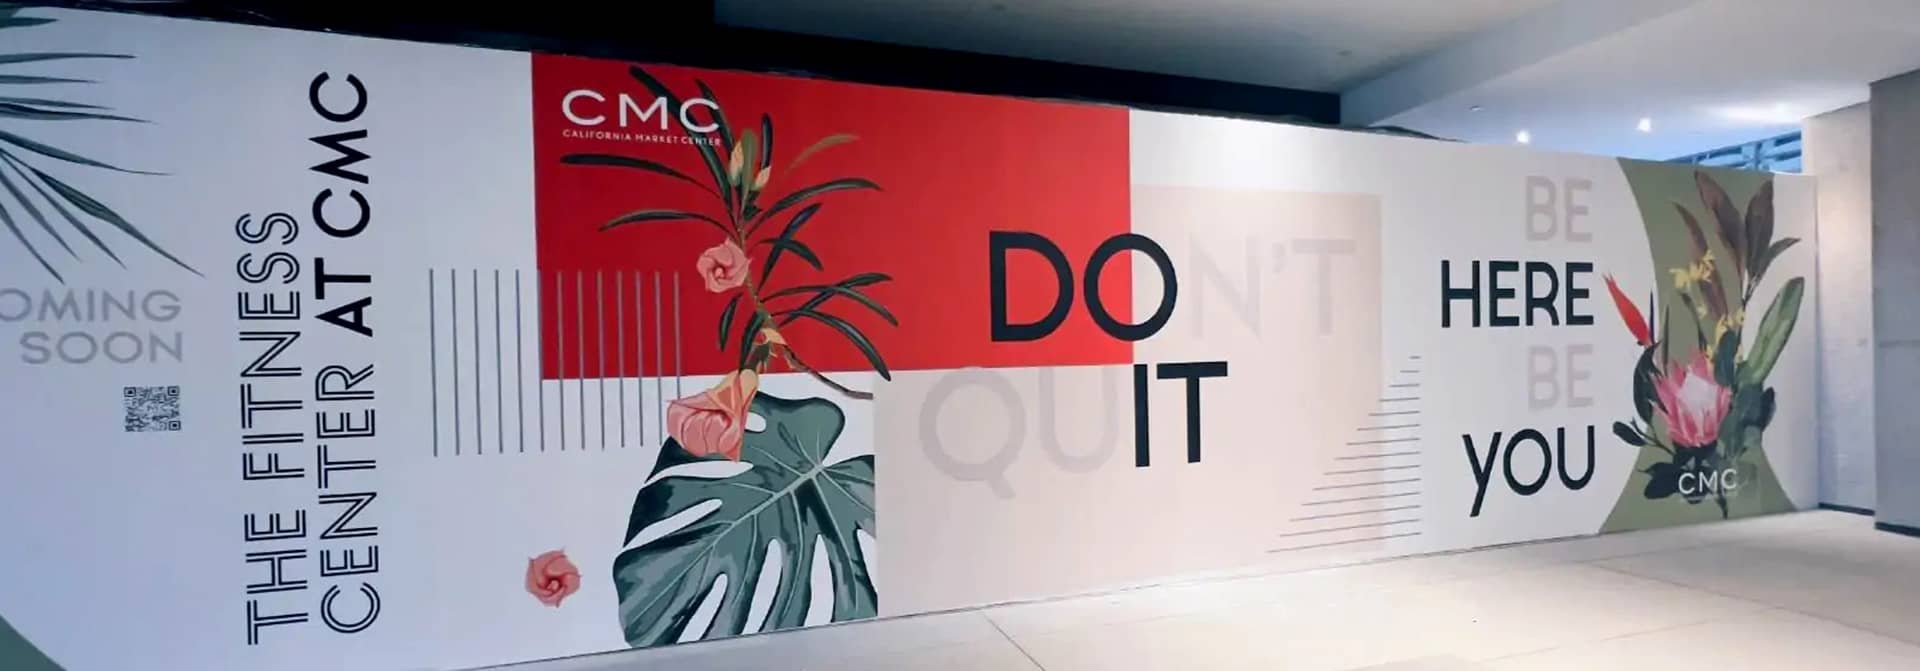 The Fitness Center at CMC's feature wall in floral theme and branded elements for the opening